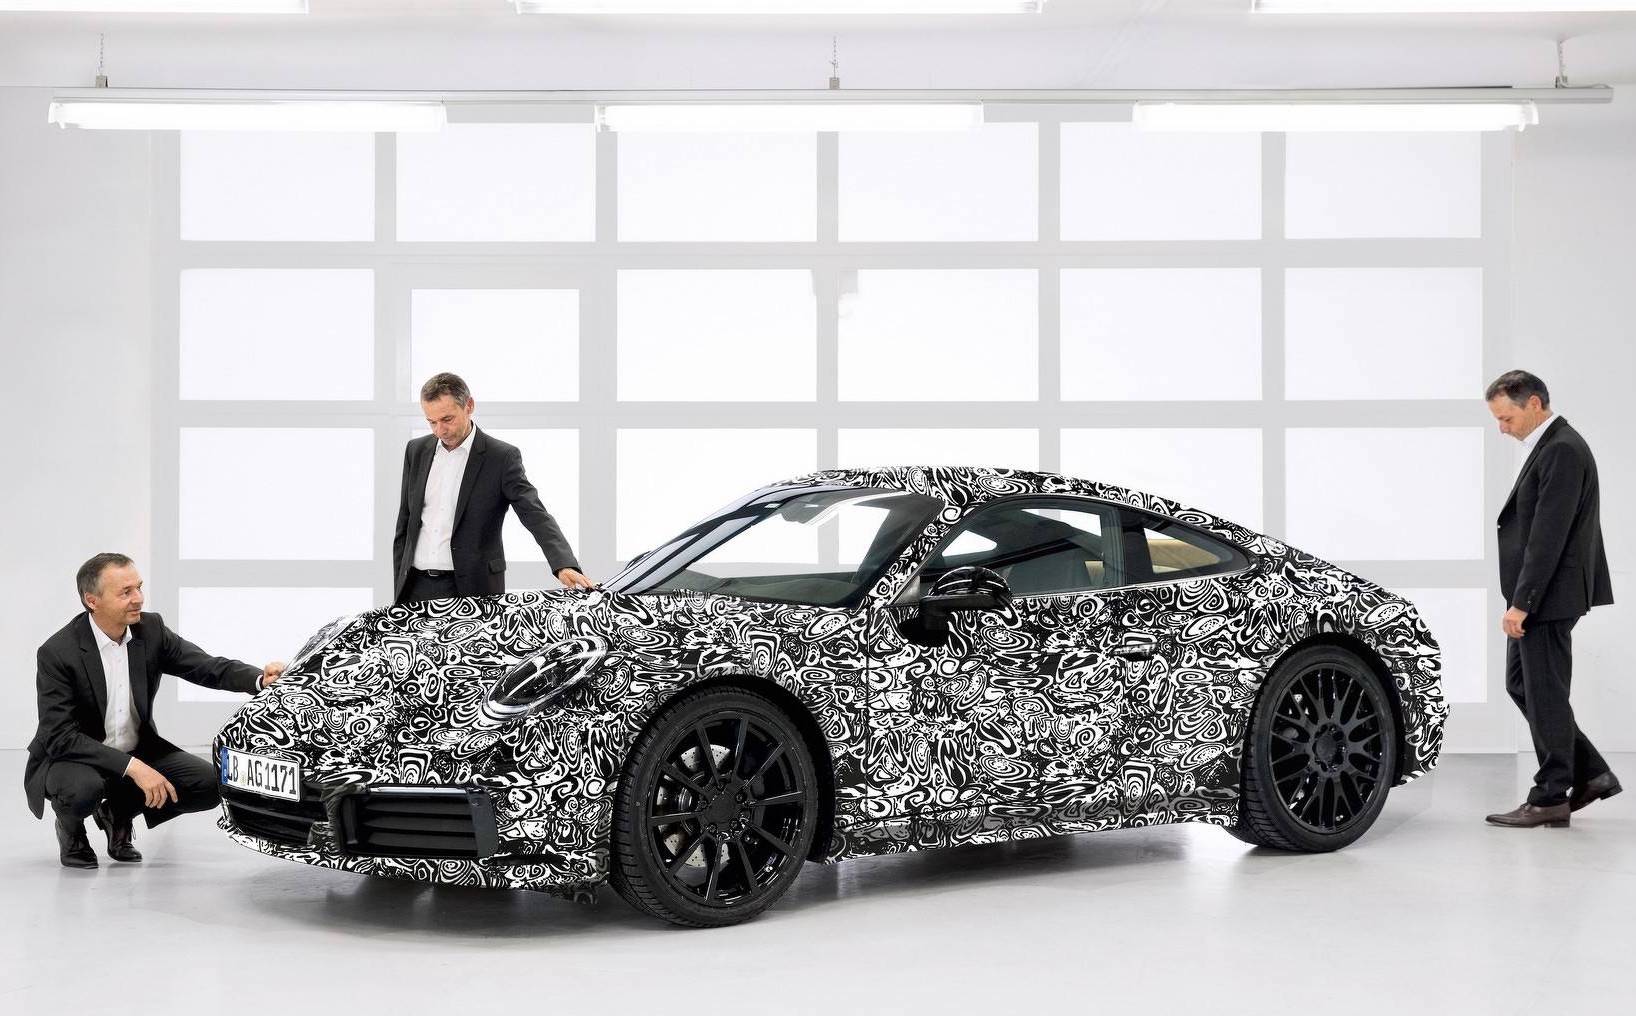 2019 Porsche 911 992 previewed, electric option possible